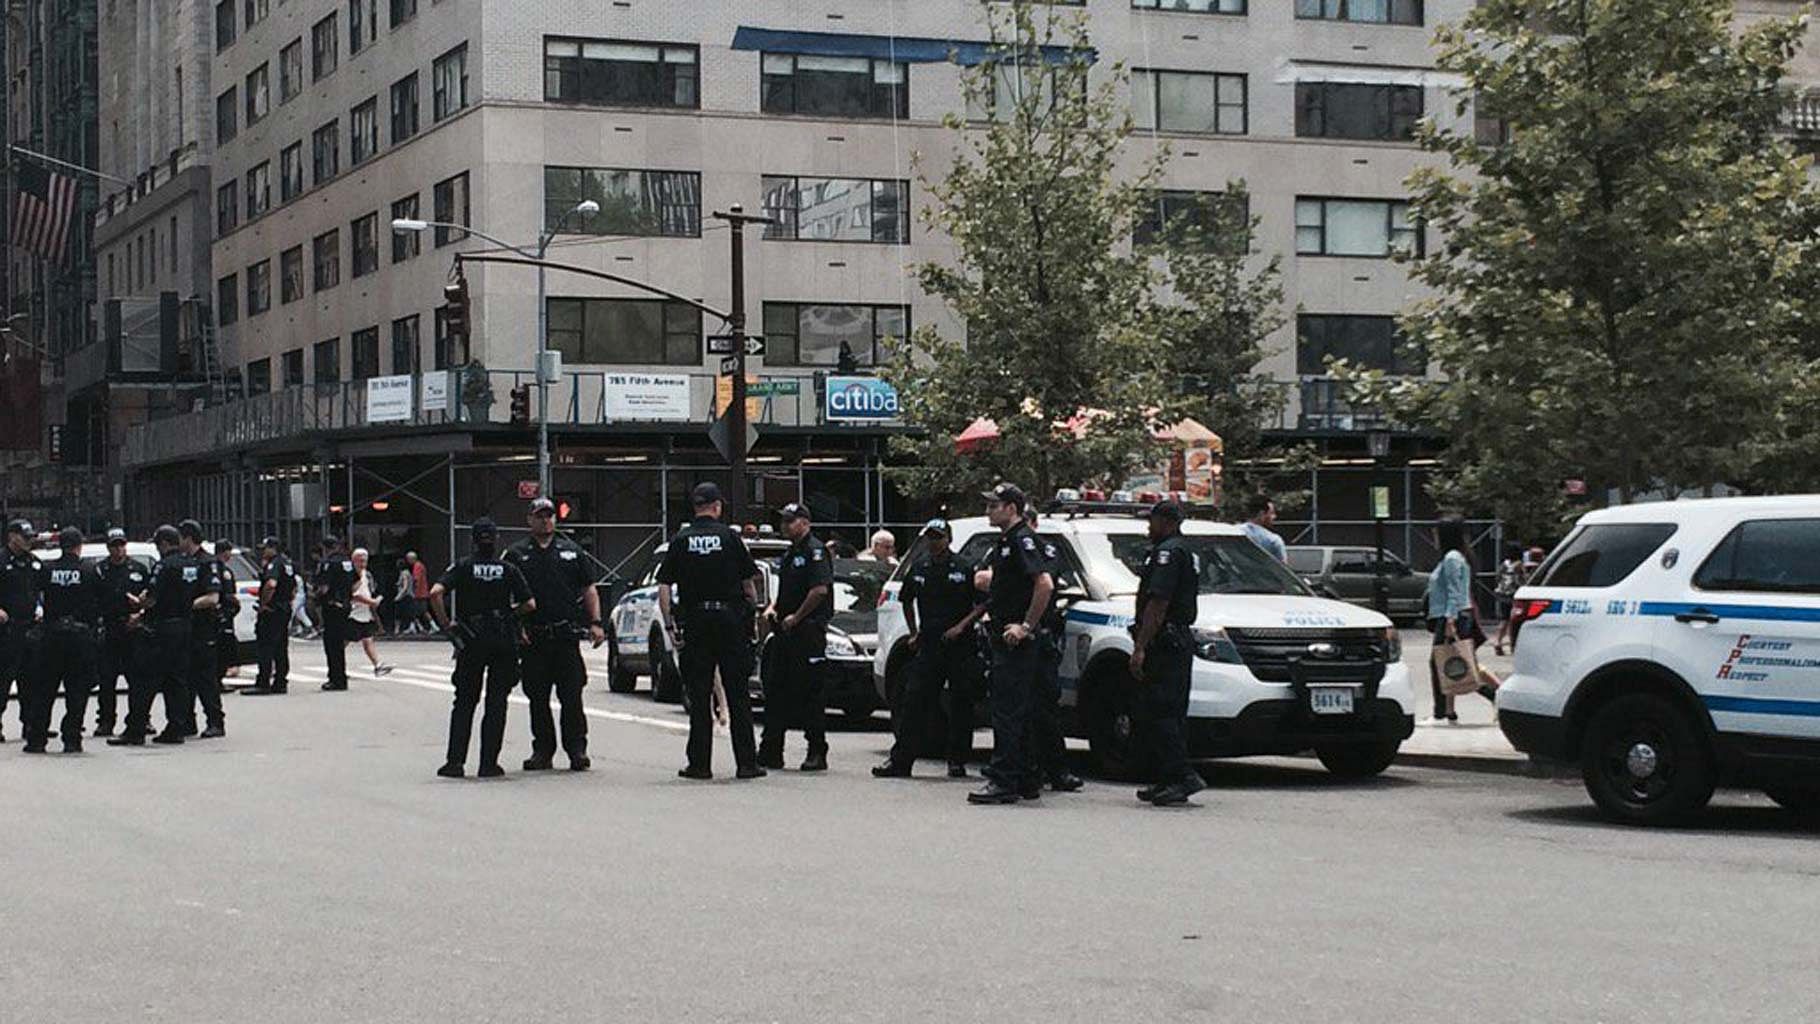 Security outside the site of explosion at Central Park in New York on Sunday. (Photo Courtesy: <a href="https://twitter.com/Lori4NY/status/749640760396513285/photo/1">Twitter.com/@Lori4NY</a>)